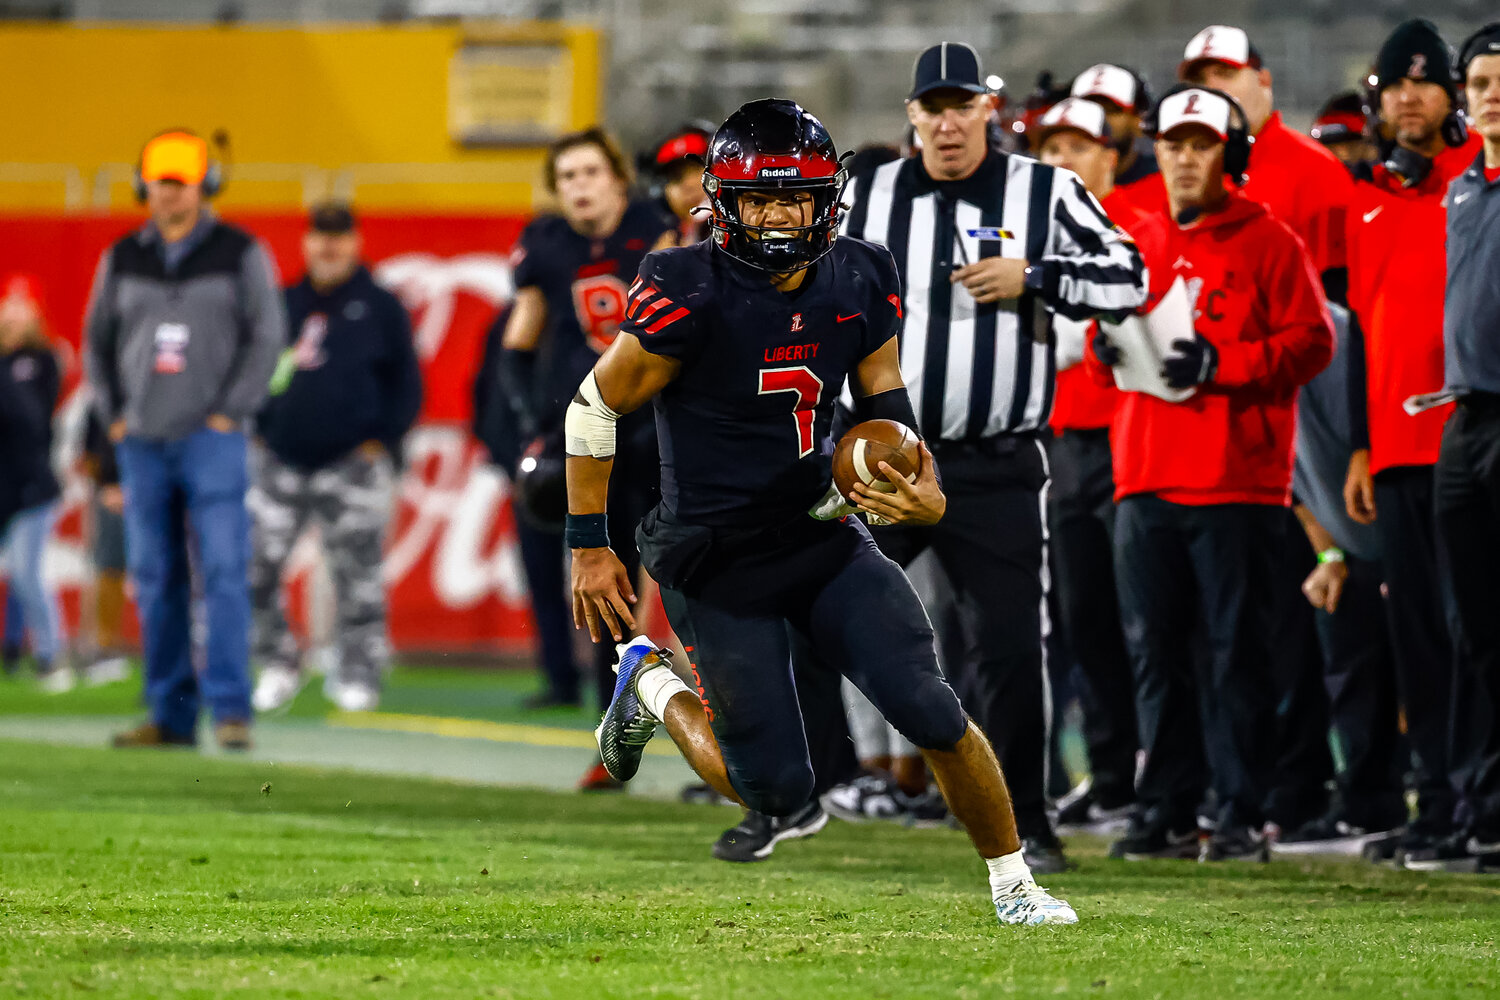 Liberty senior quarterback Navi Bruzon (7) runs for yardage in the Lions' 33-21 Open Division championship victory over Centennial on Saturday at Mountain America Stadium in Tempe. (Courtesy JJ Digos Photography/For West Valley Preps)